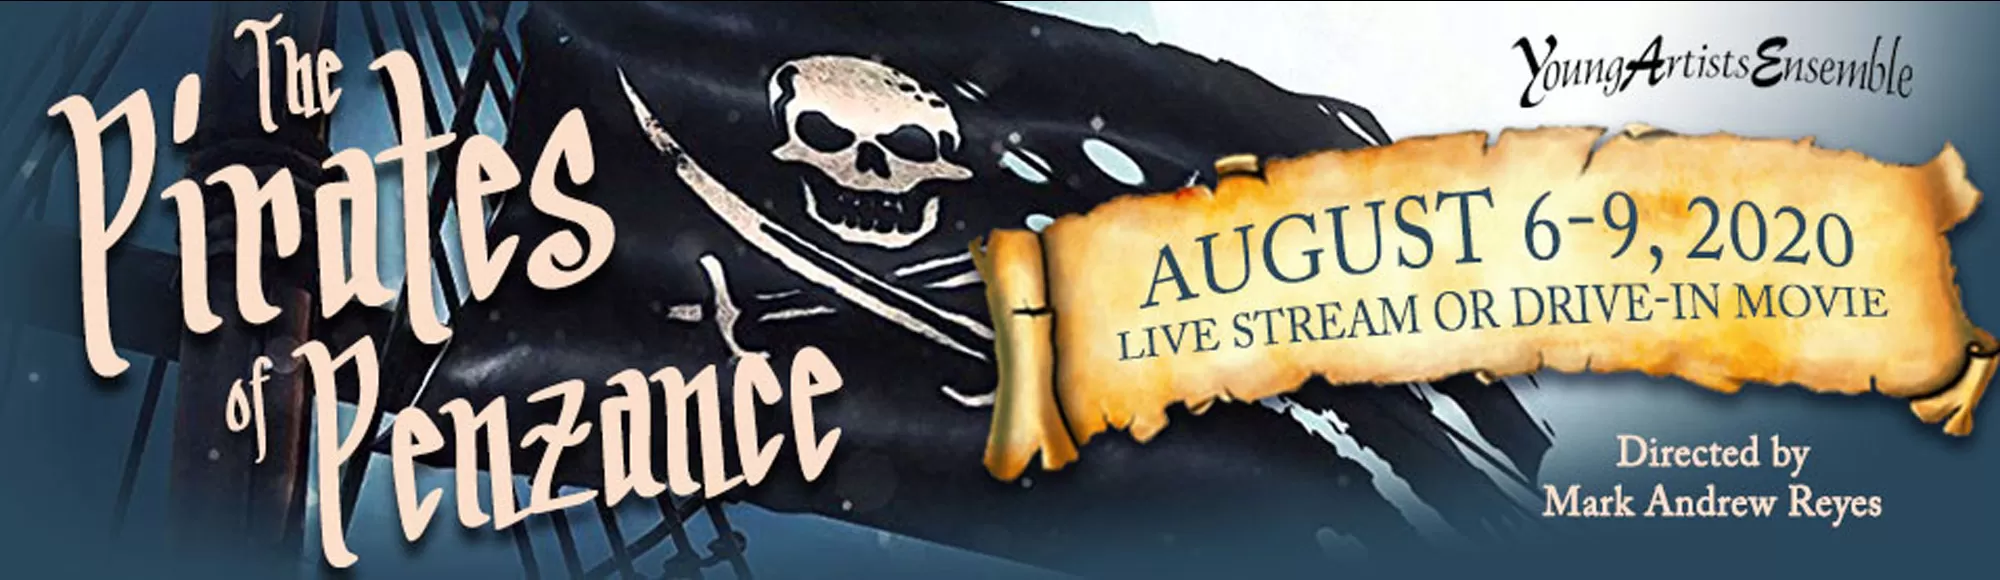 Full Cast Live Stream 8/8/20 The Pirates of Penzance - Youtube Live